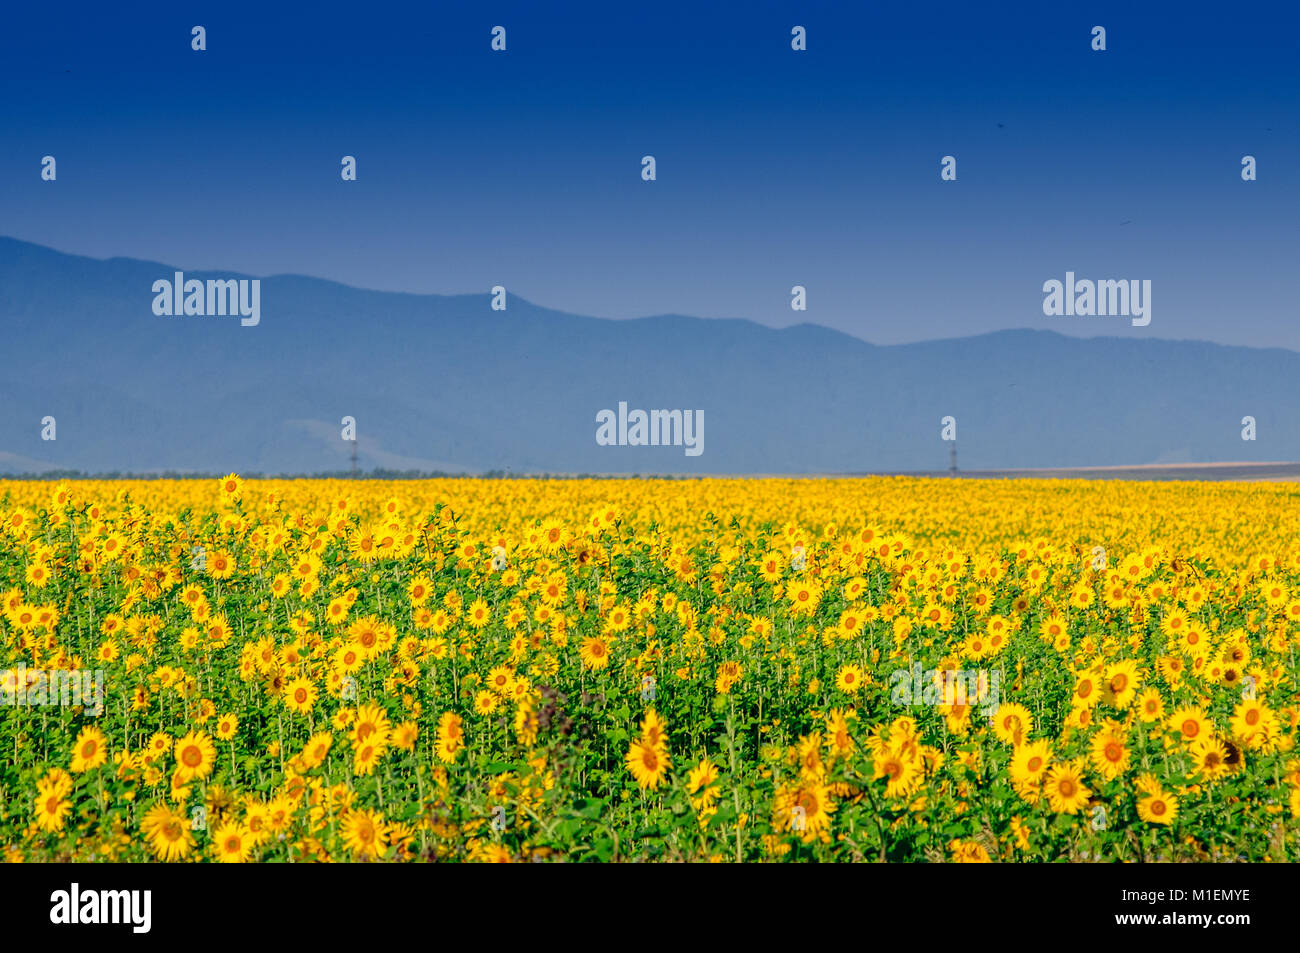 Sunflower field in full blossom in Altai in July Stock Photo